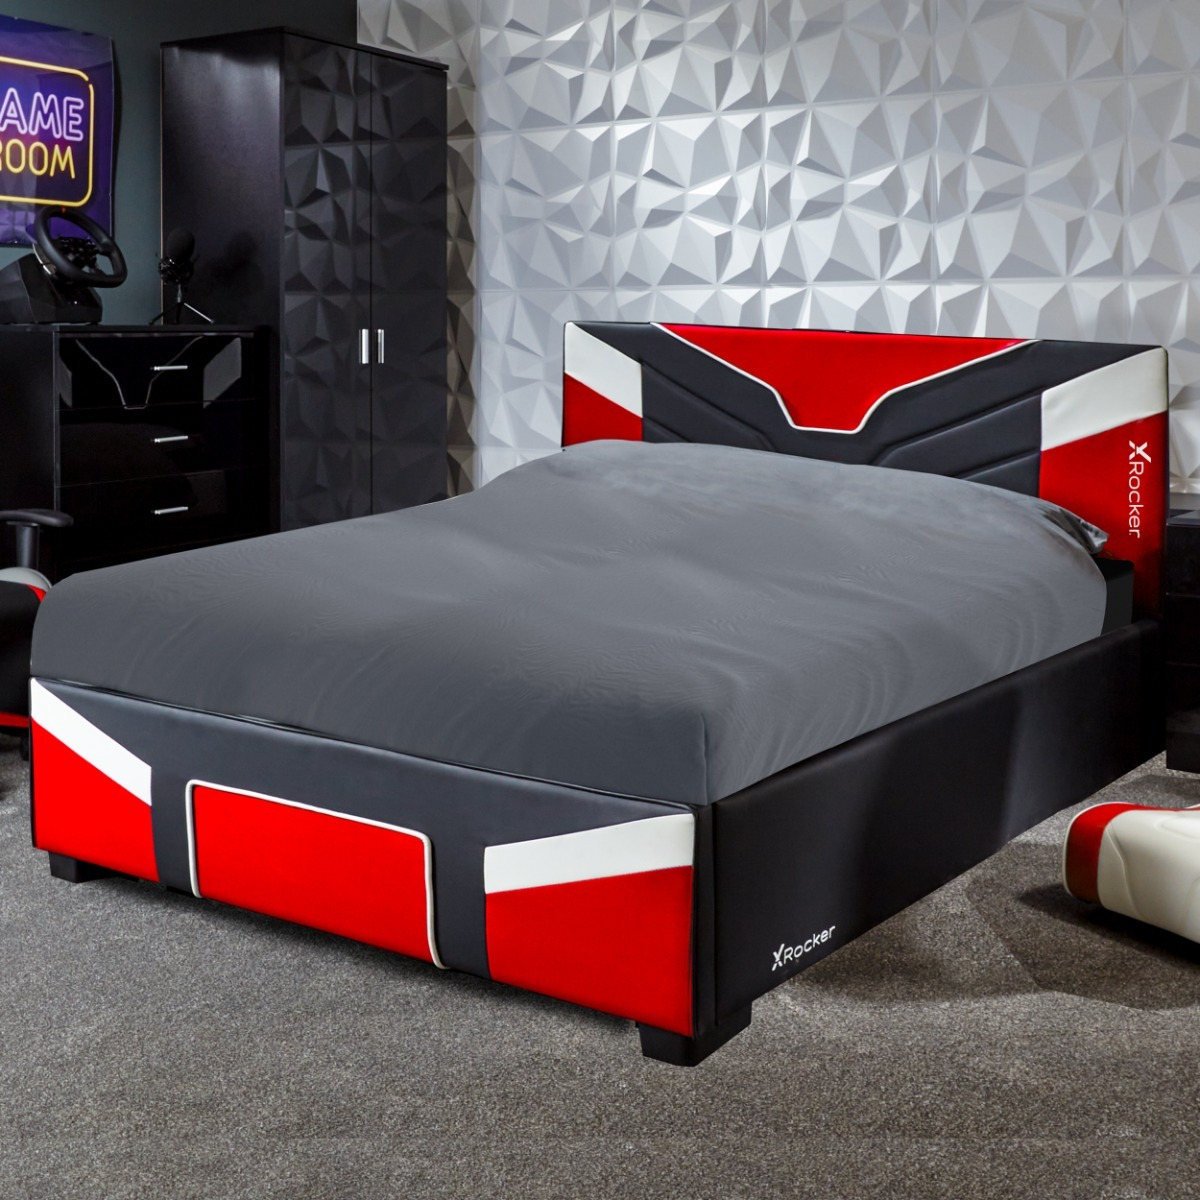 X Rocker Cerberus MKII Bed In A Box Small Double Red - image 1